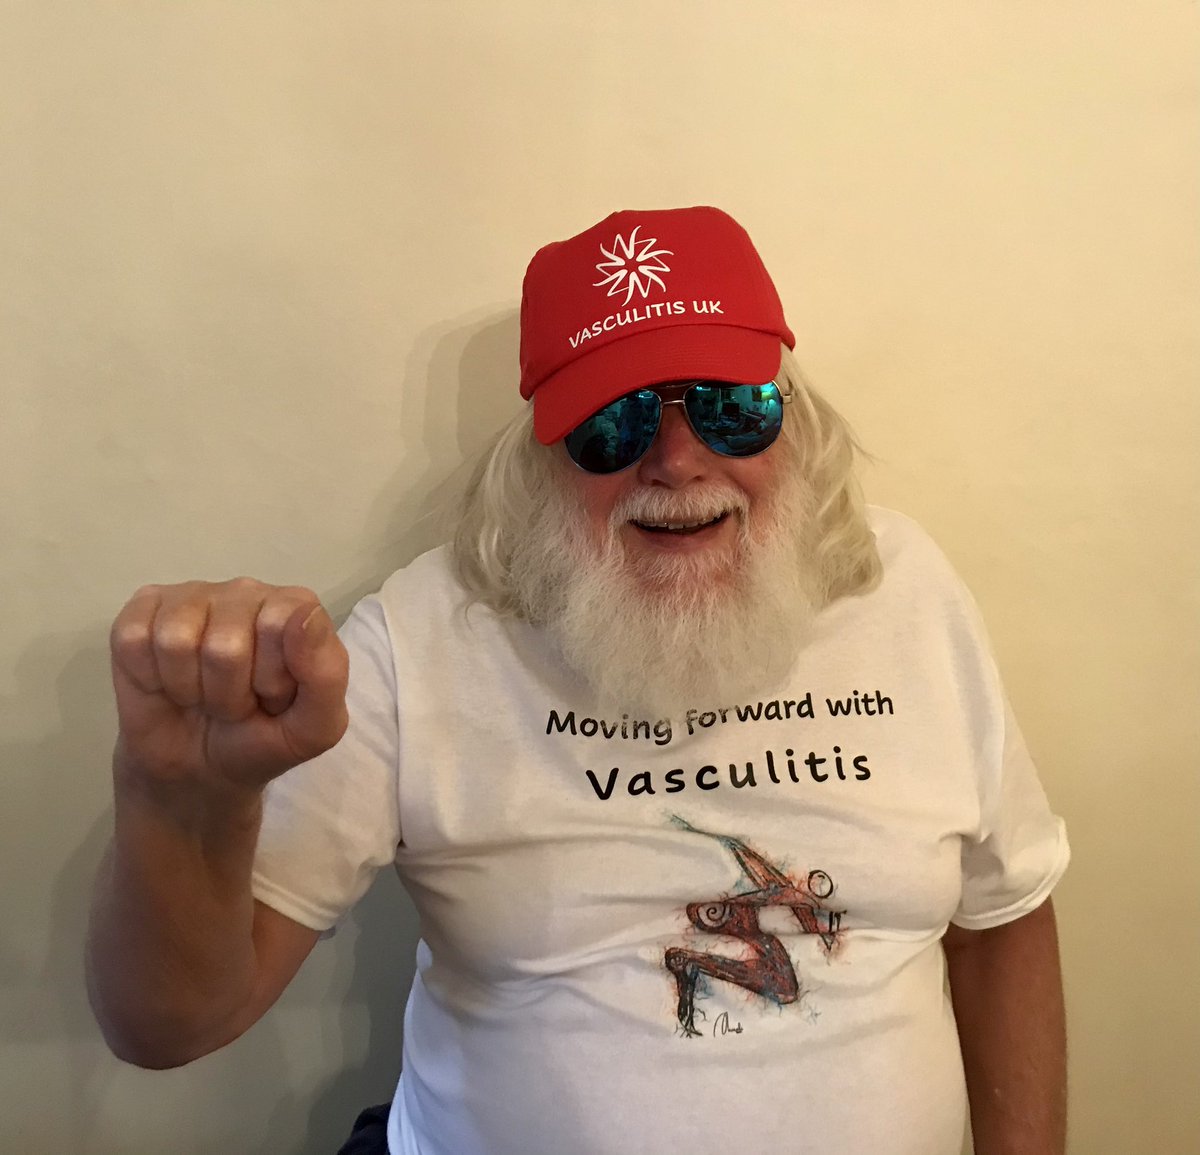 Today May 15th is International #VasculitisAwarenessDay #Vasculitis #RareDisease 
So we thought we would share a memory from Vasculitis Awareness Day 2021 youtube.com/watch?v=mJ0P5R…
Take a moment to watch and listen to John’s take on #VisualisingVasculitis